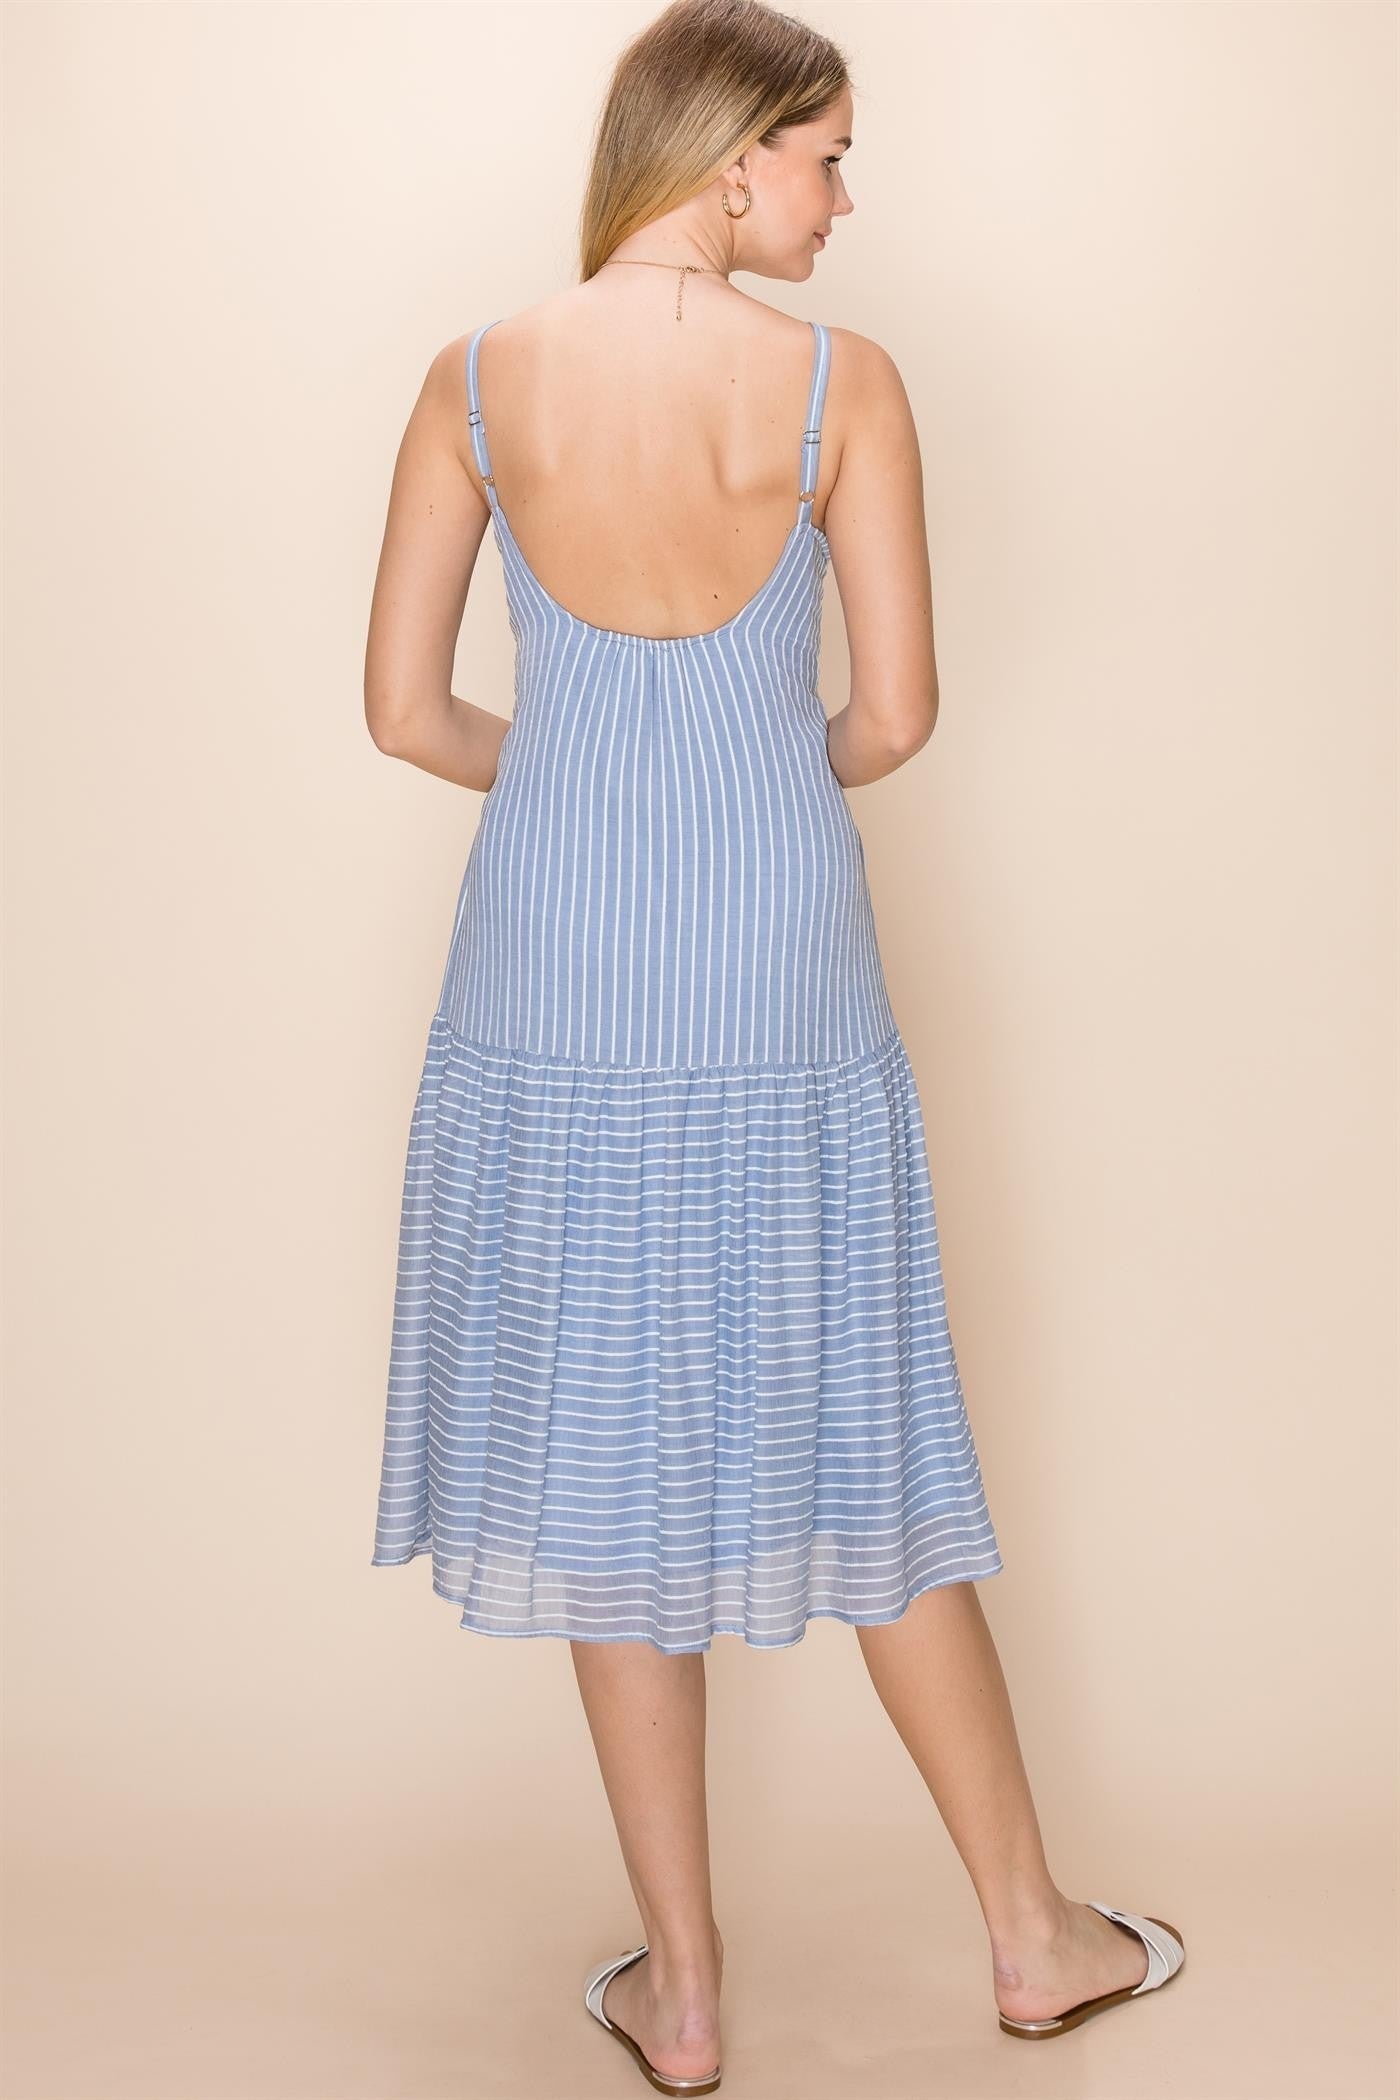 Blue and white striped dress